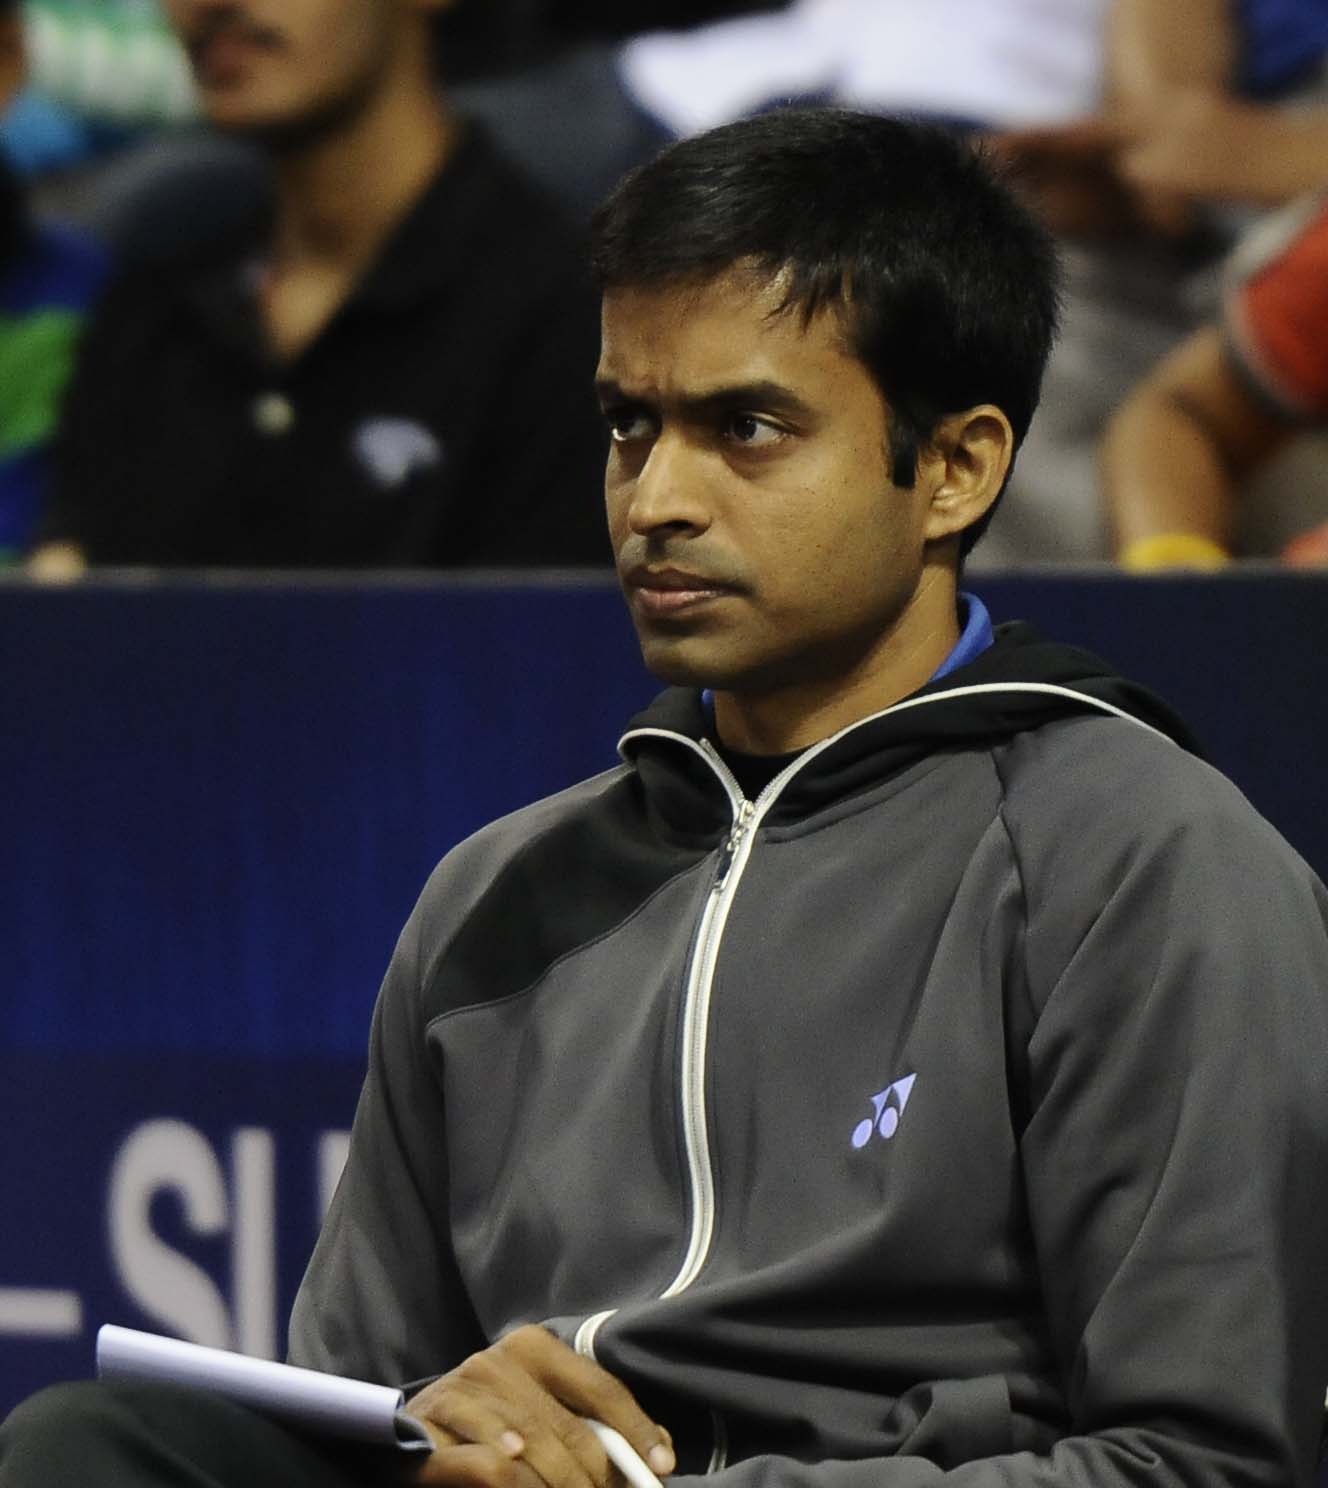 Pullela Gopichand supports ban on players who indulge in age manipulation